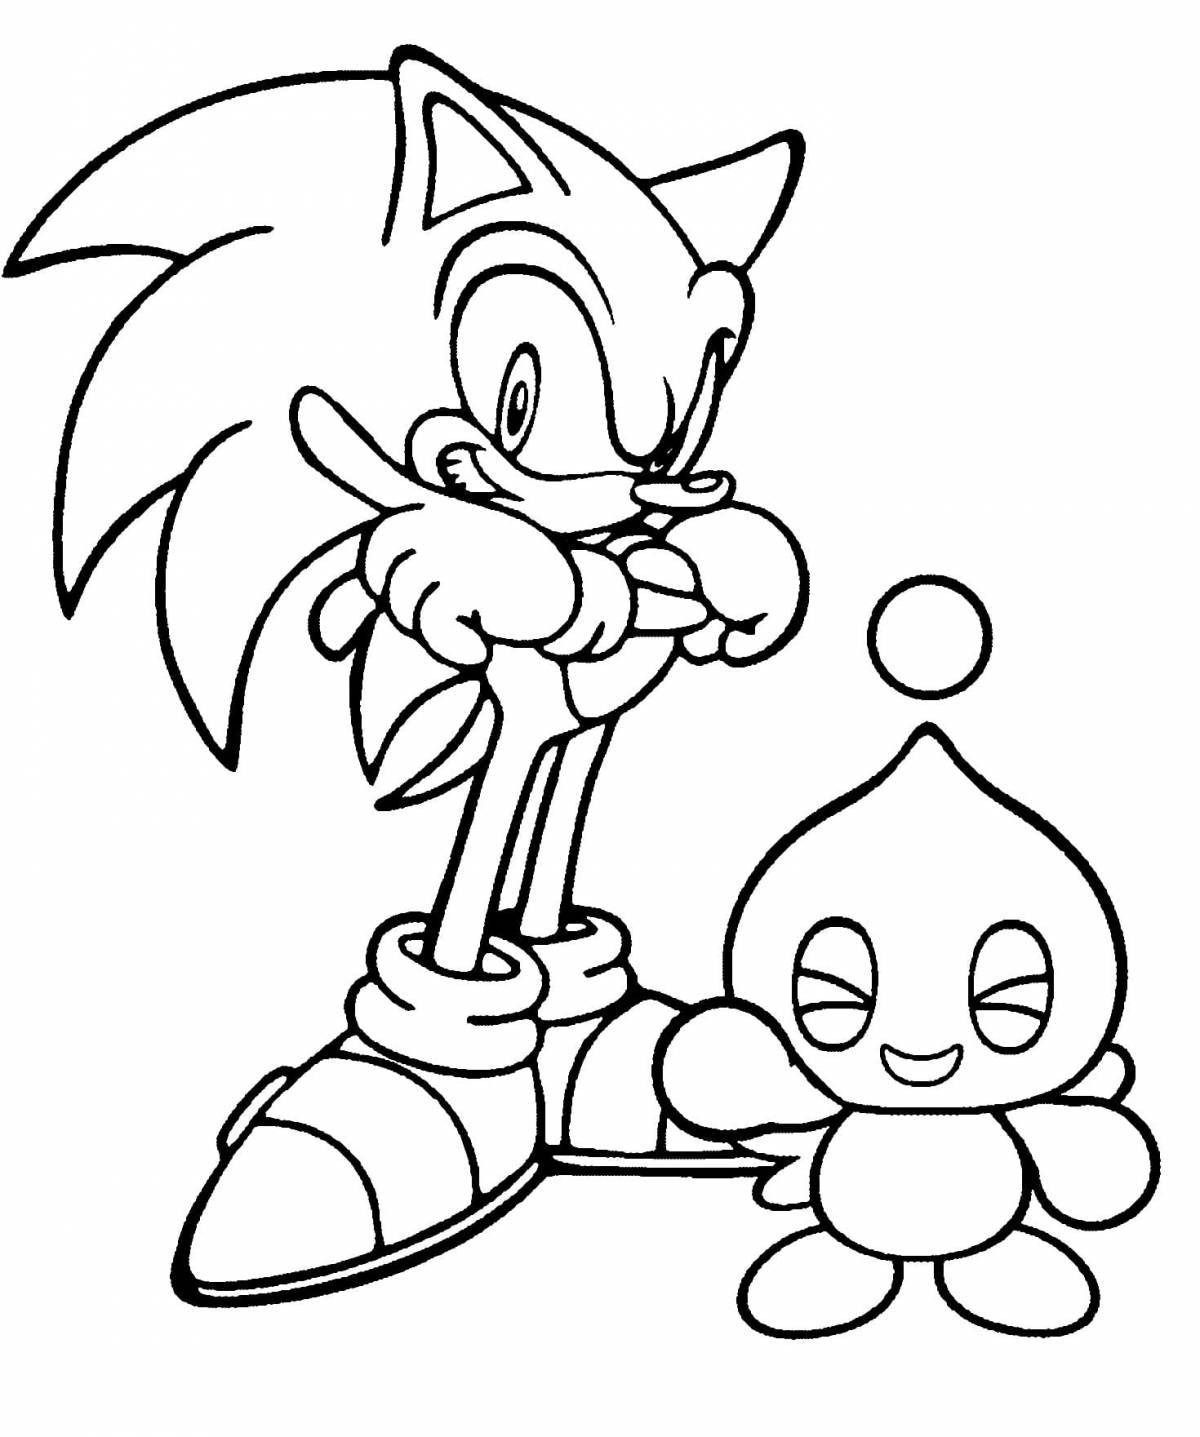 Radiant coloring page sonic for kids